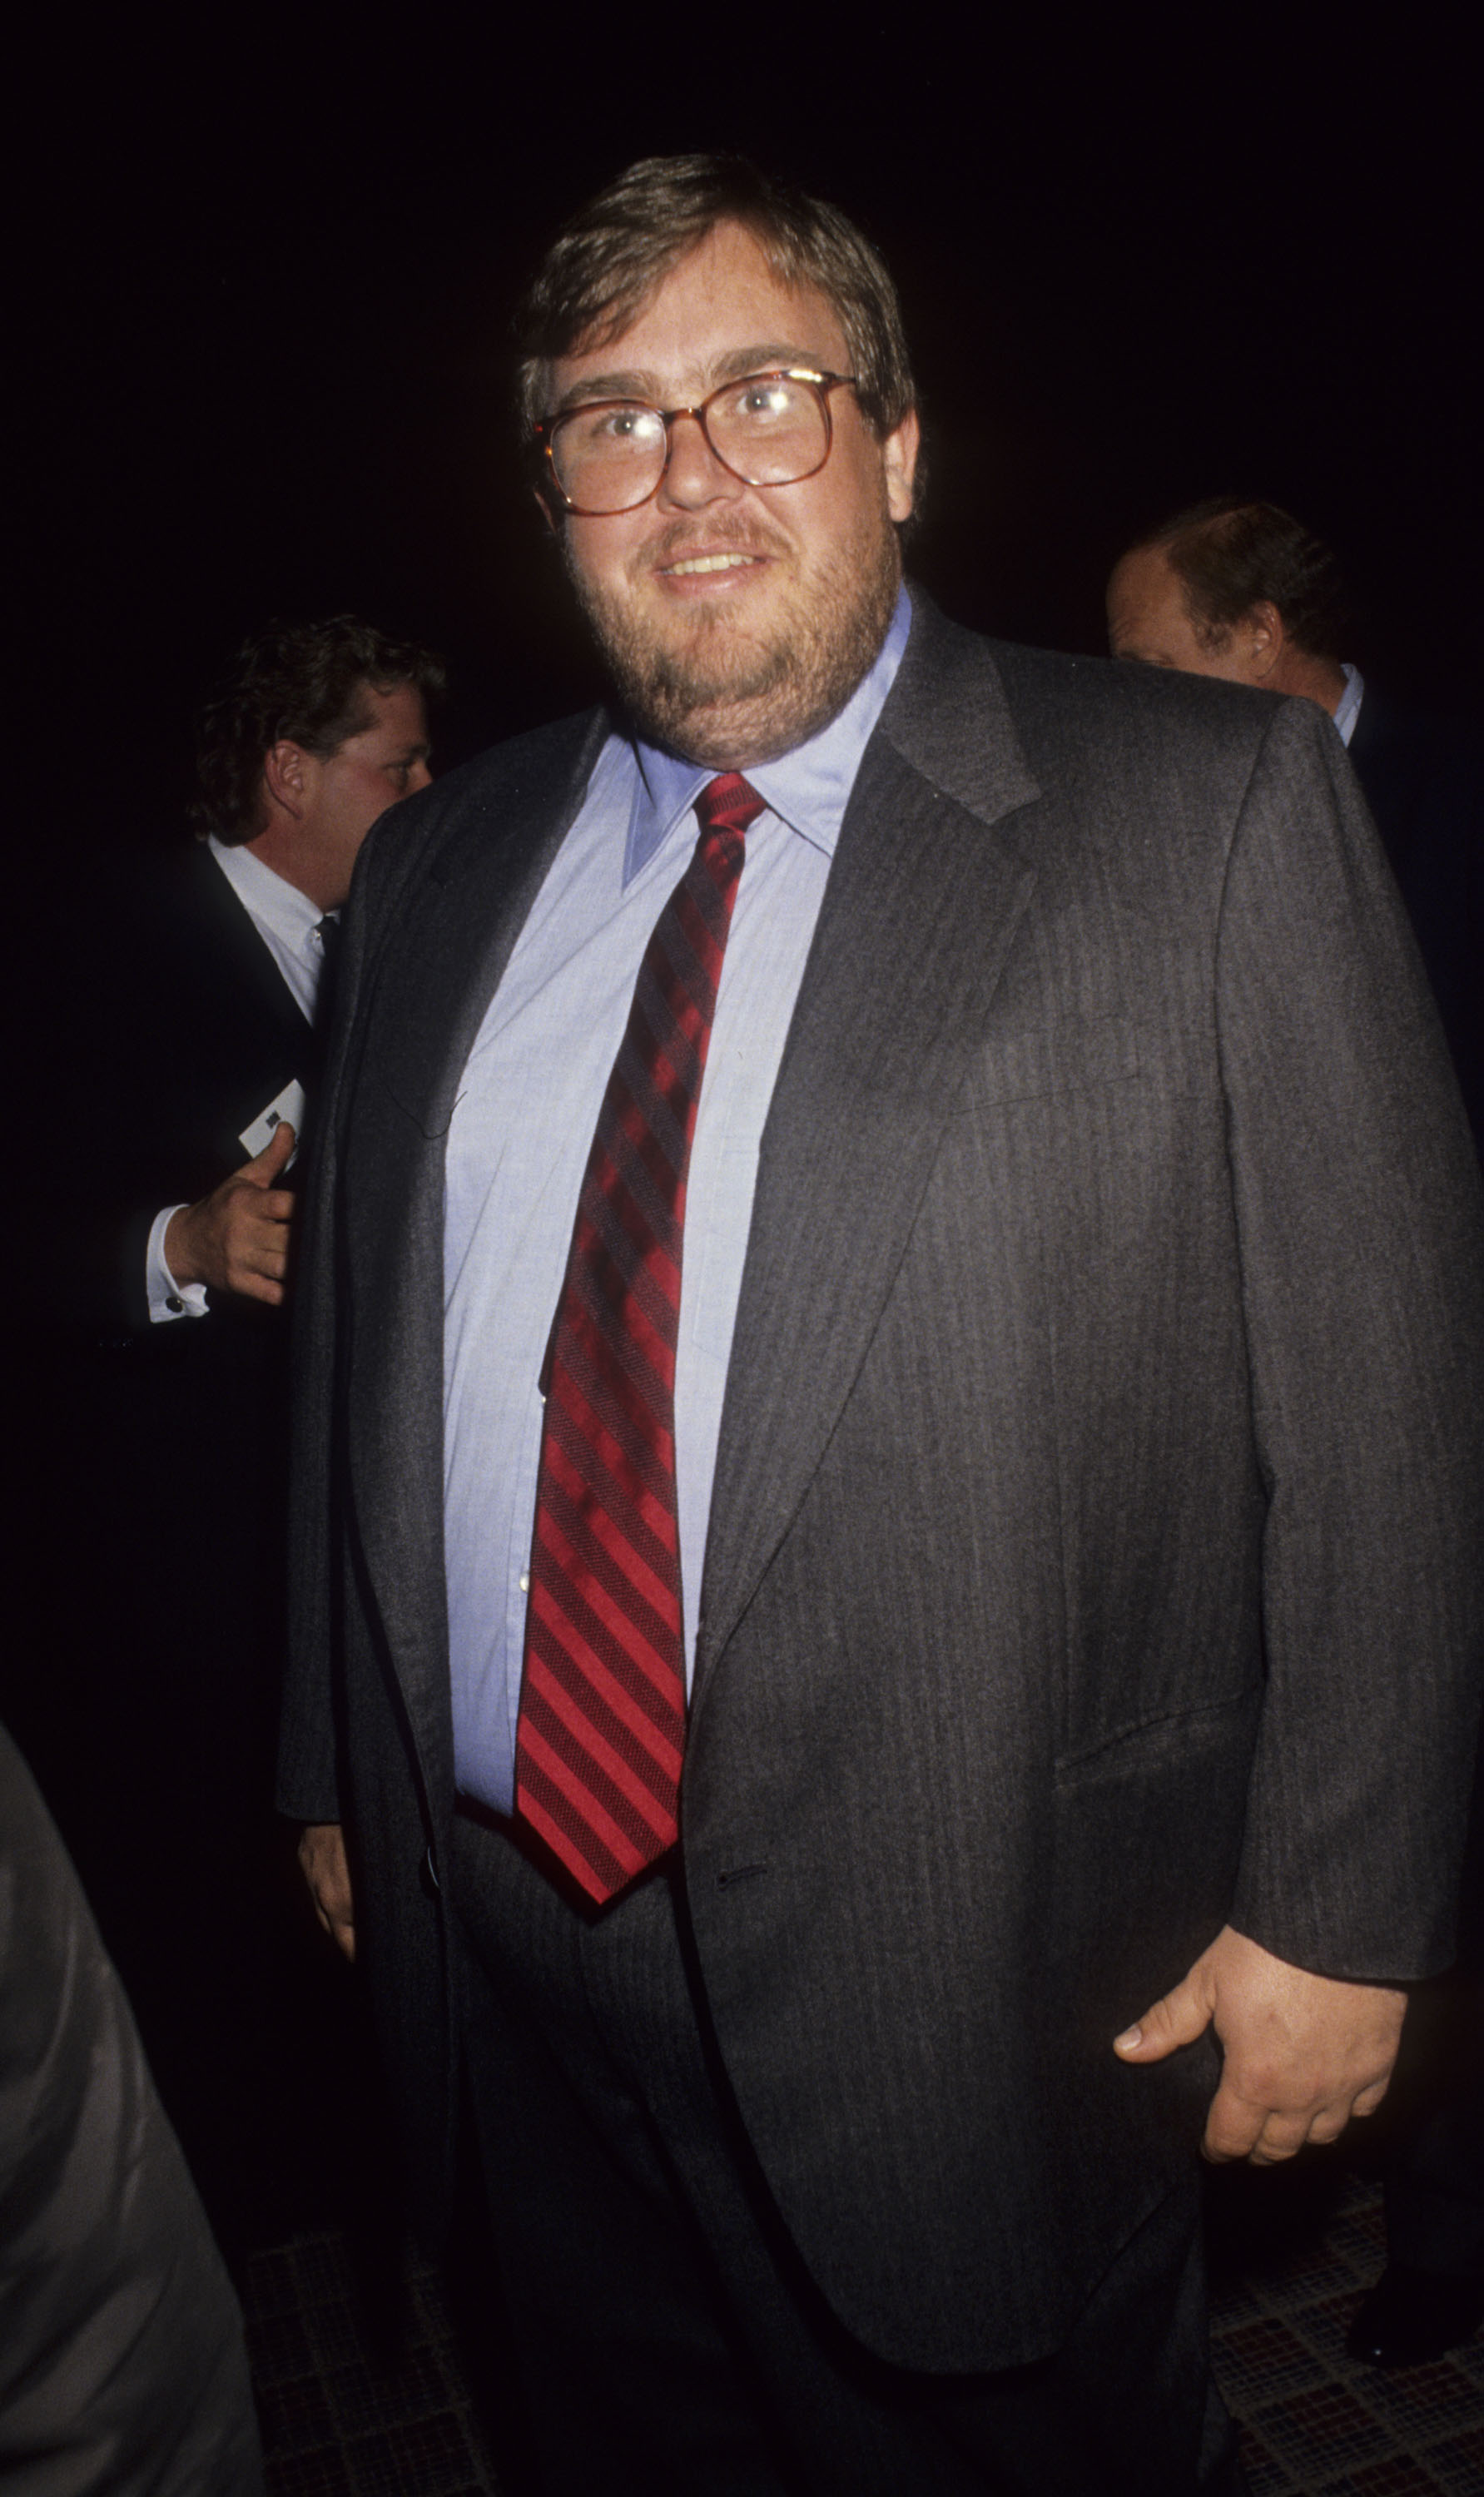 John Candy at the "ShoWest '91 Convention" on February 7, 1991, in Las Vegas. | Source: Getty Images